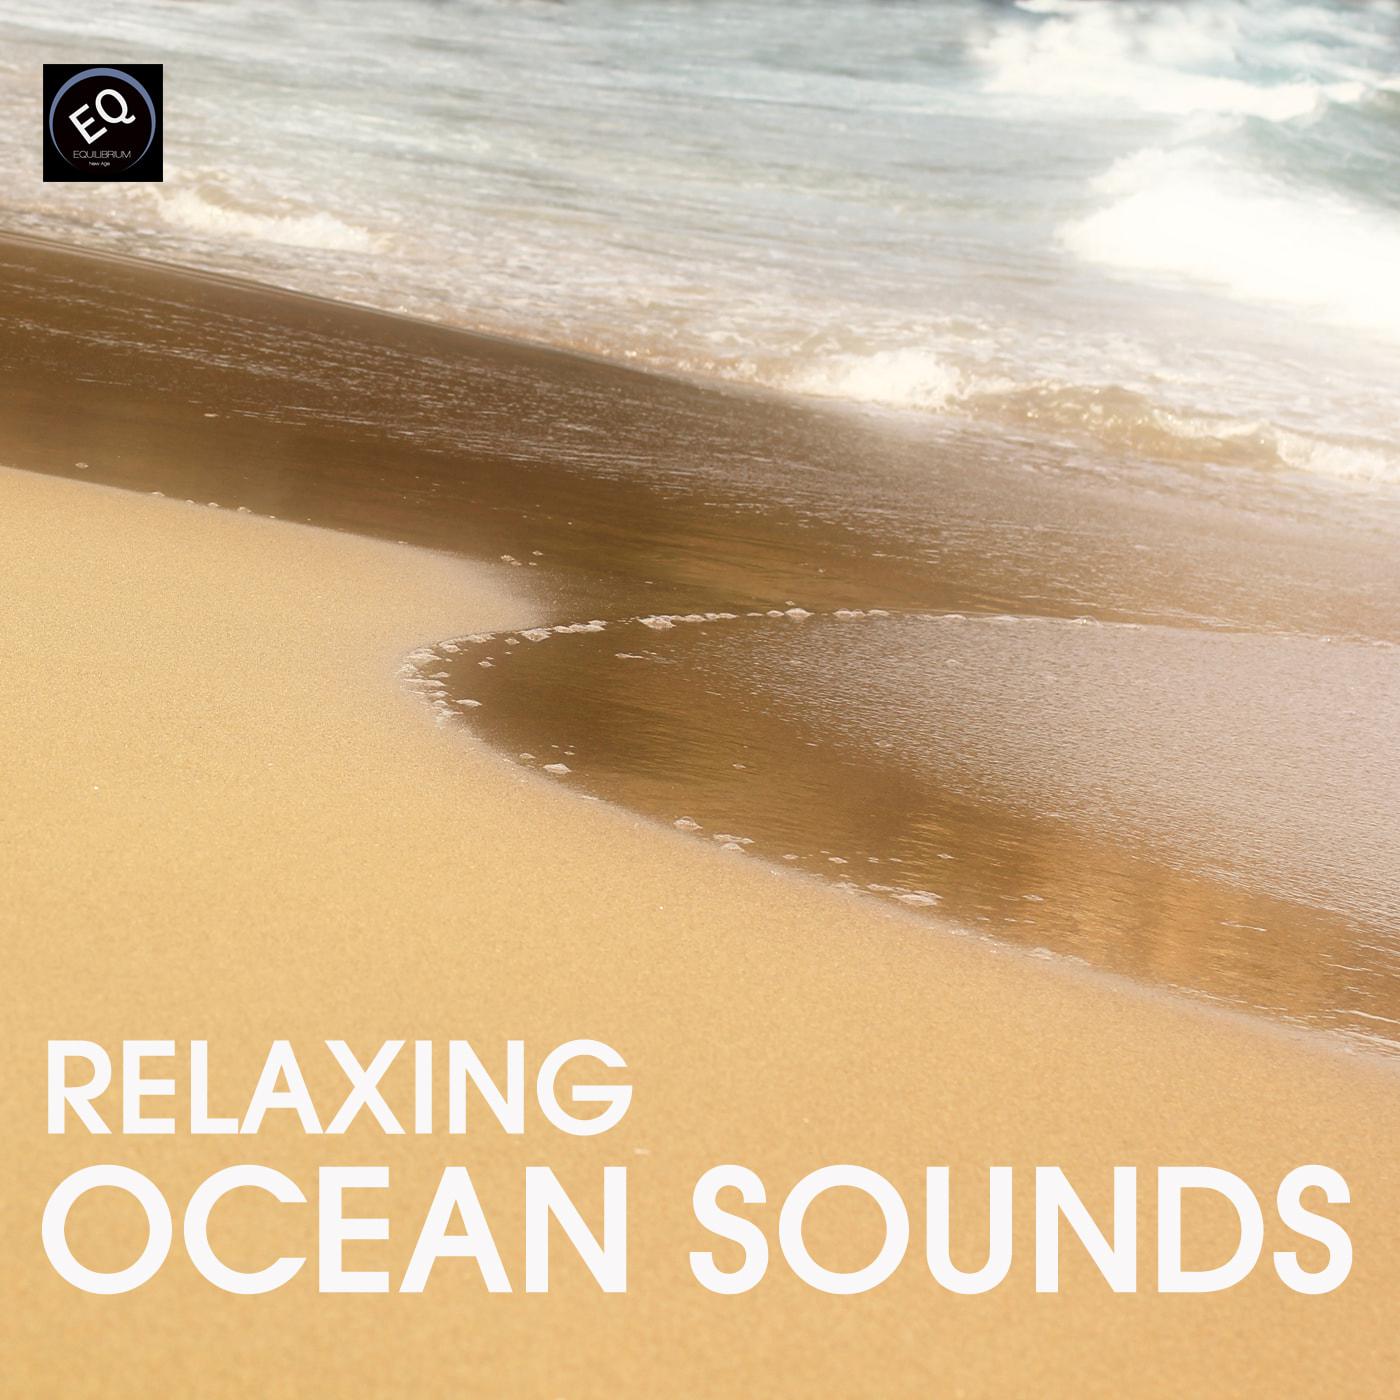 Ocean Sounds - Relaxing Ocean Sounds for Sleep - Soothing Ocean Waves for Relaxation Meditation, Sleep, Yoga, Spa and Massage Therapy. Healing Sounds of Nature